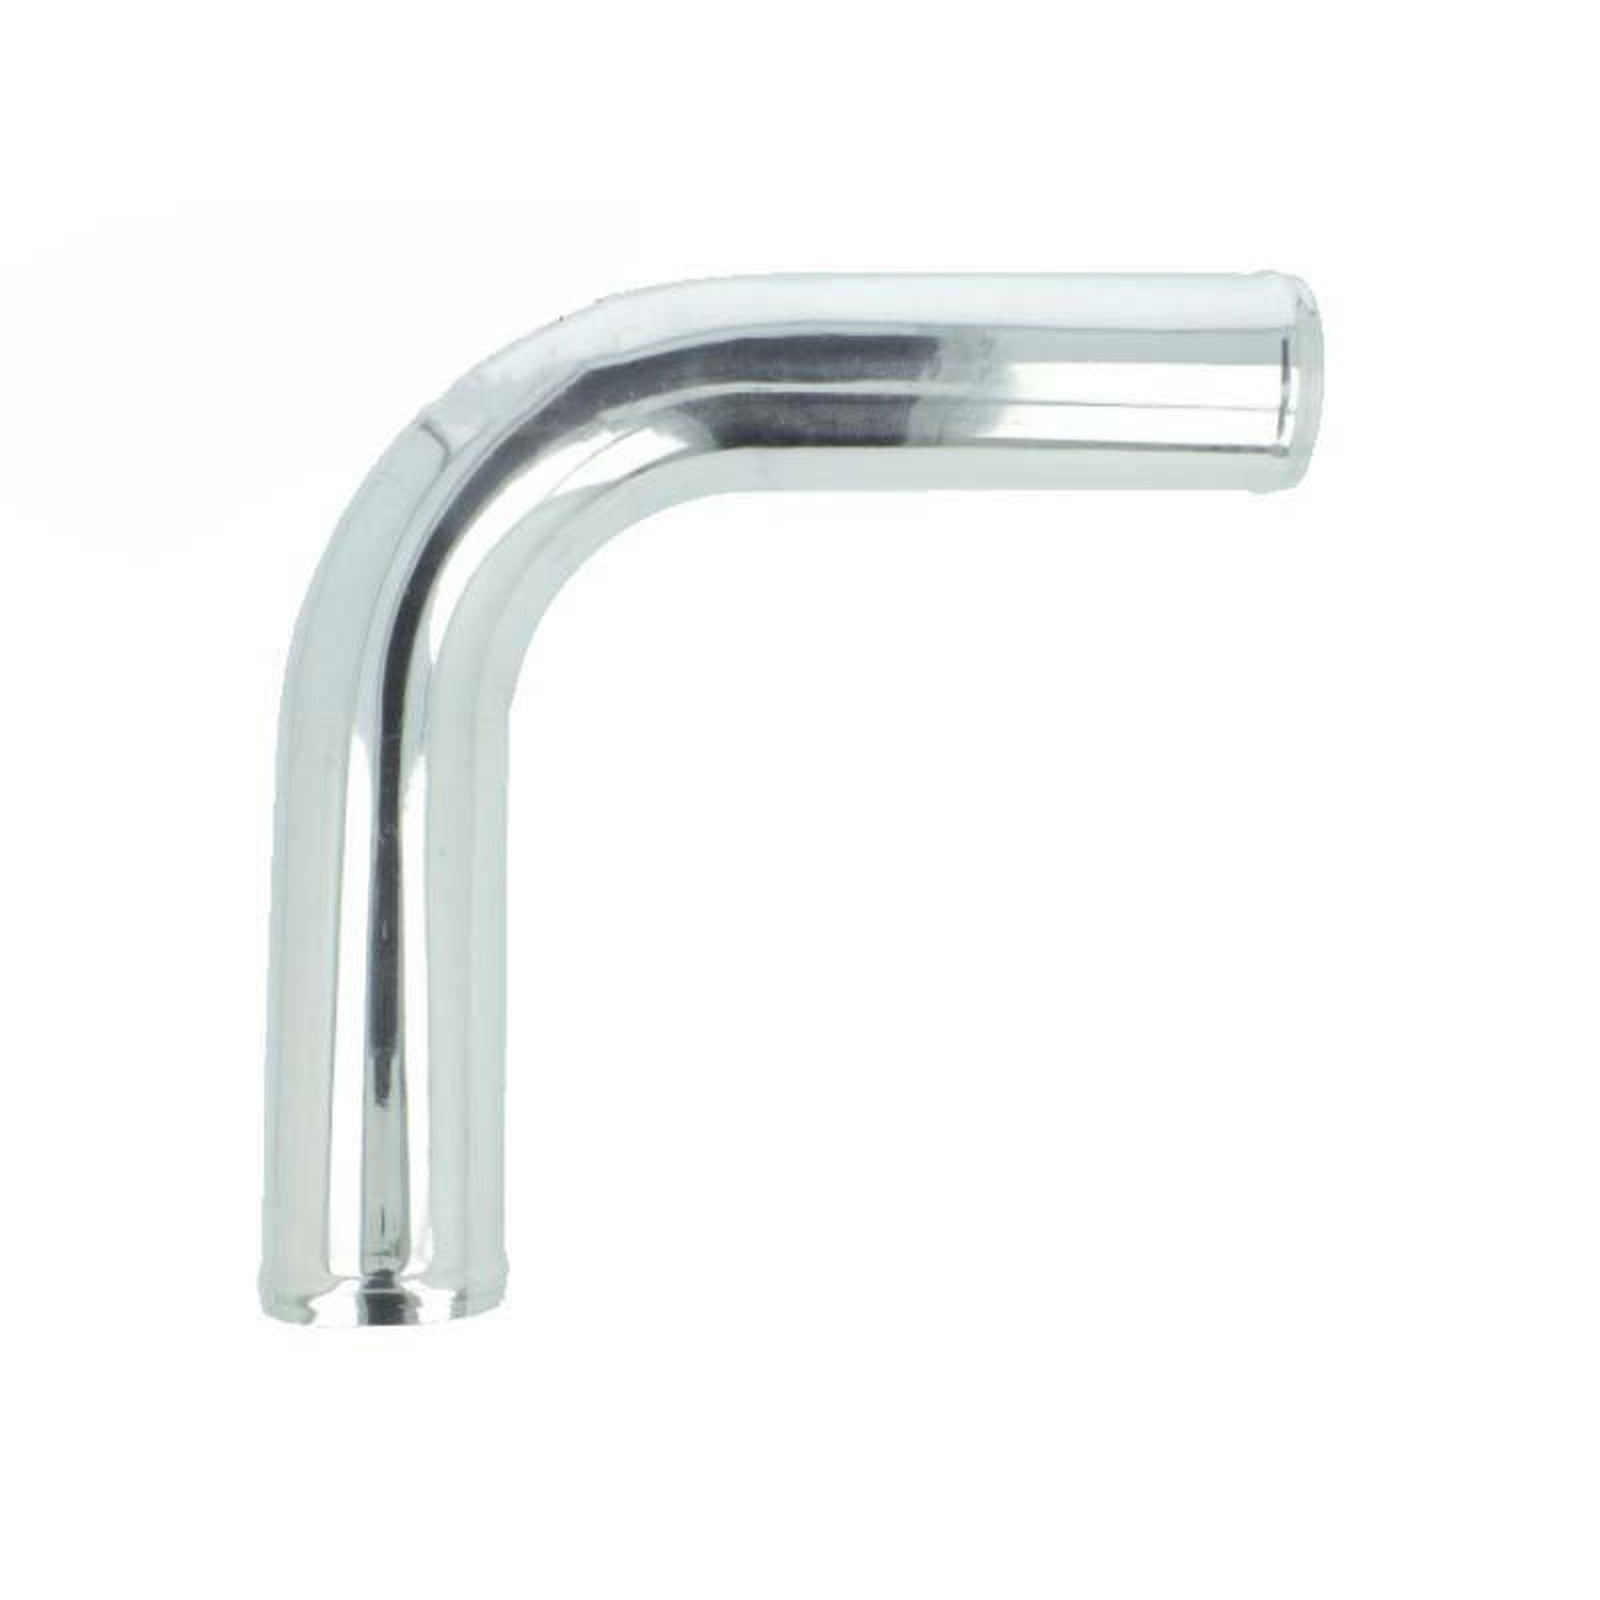 BOOST Products Aluminum Elbow 90 Degrees with 70mm (2-3/4") OD, Mandrel Bent, Polished